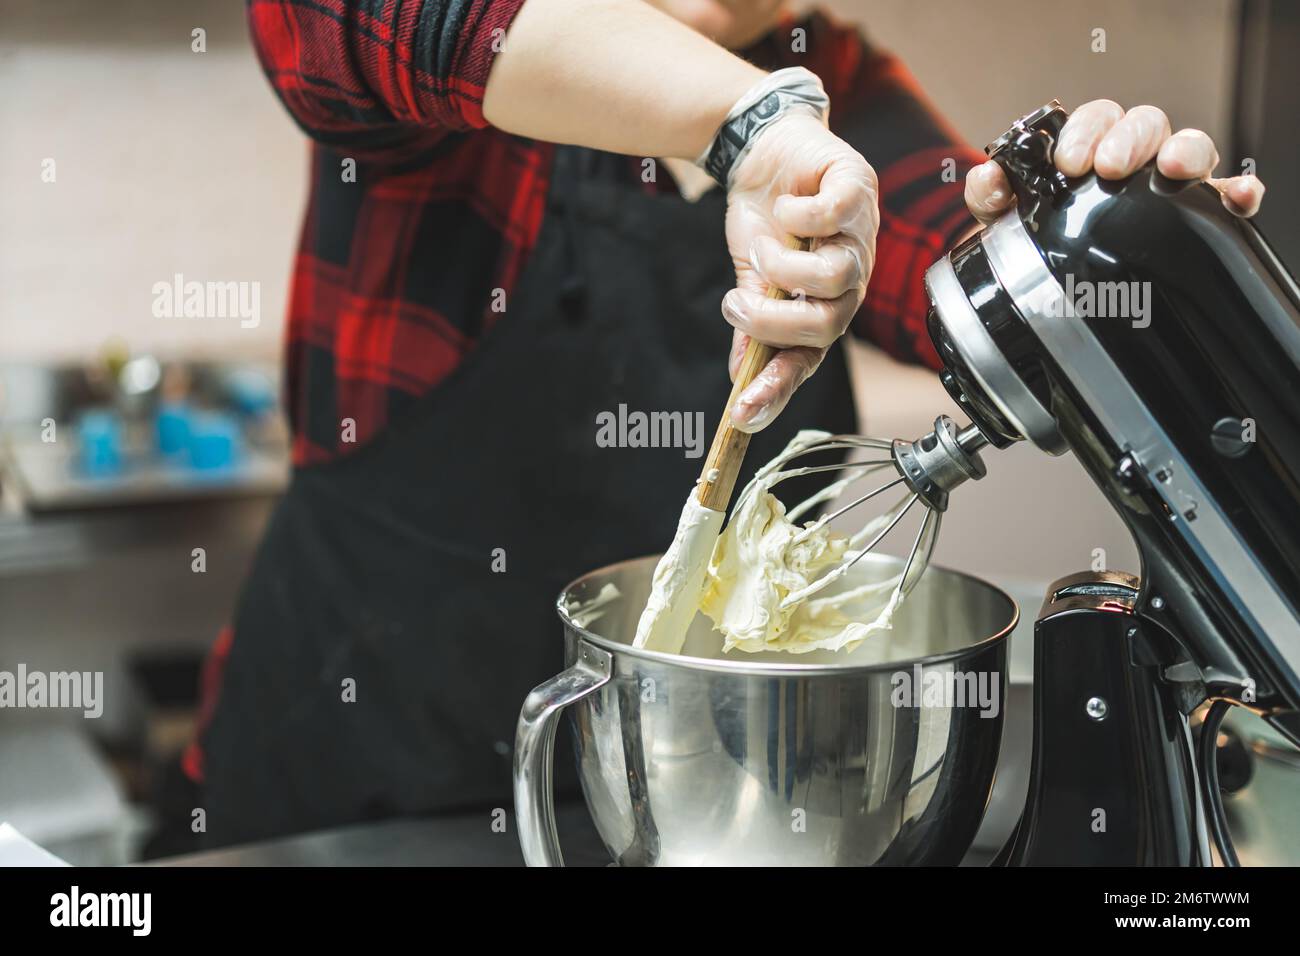 Bakery equipment. Caucasian person using spatula and standing mixer to create fluffy buttercream frosting. High quality photo Stock Photo